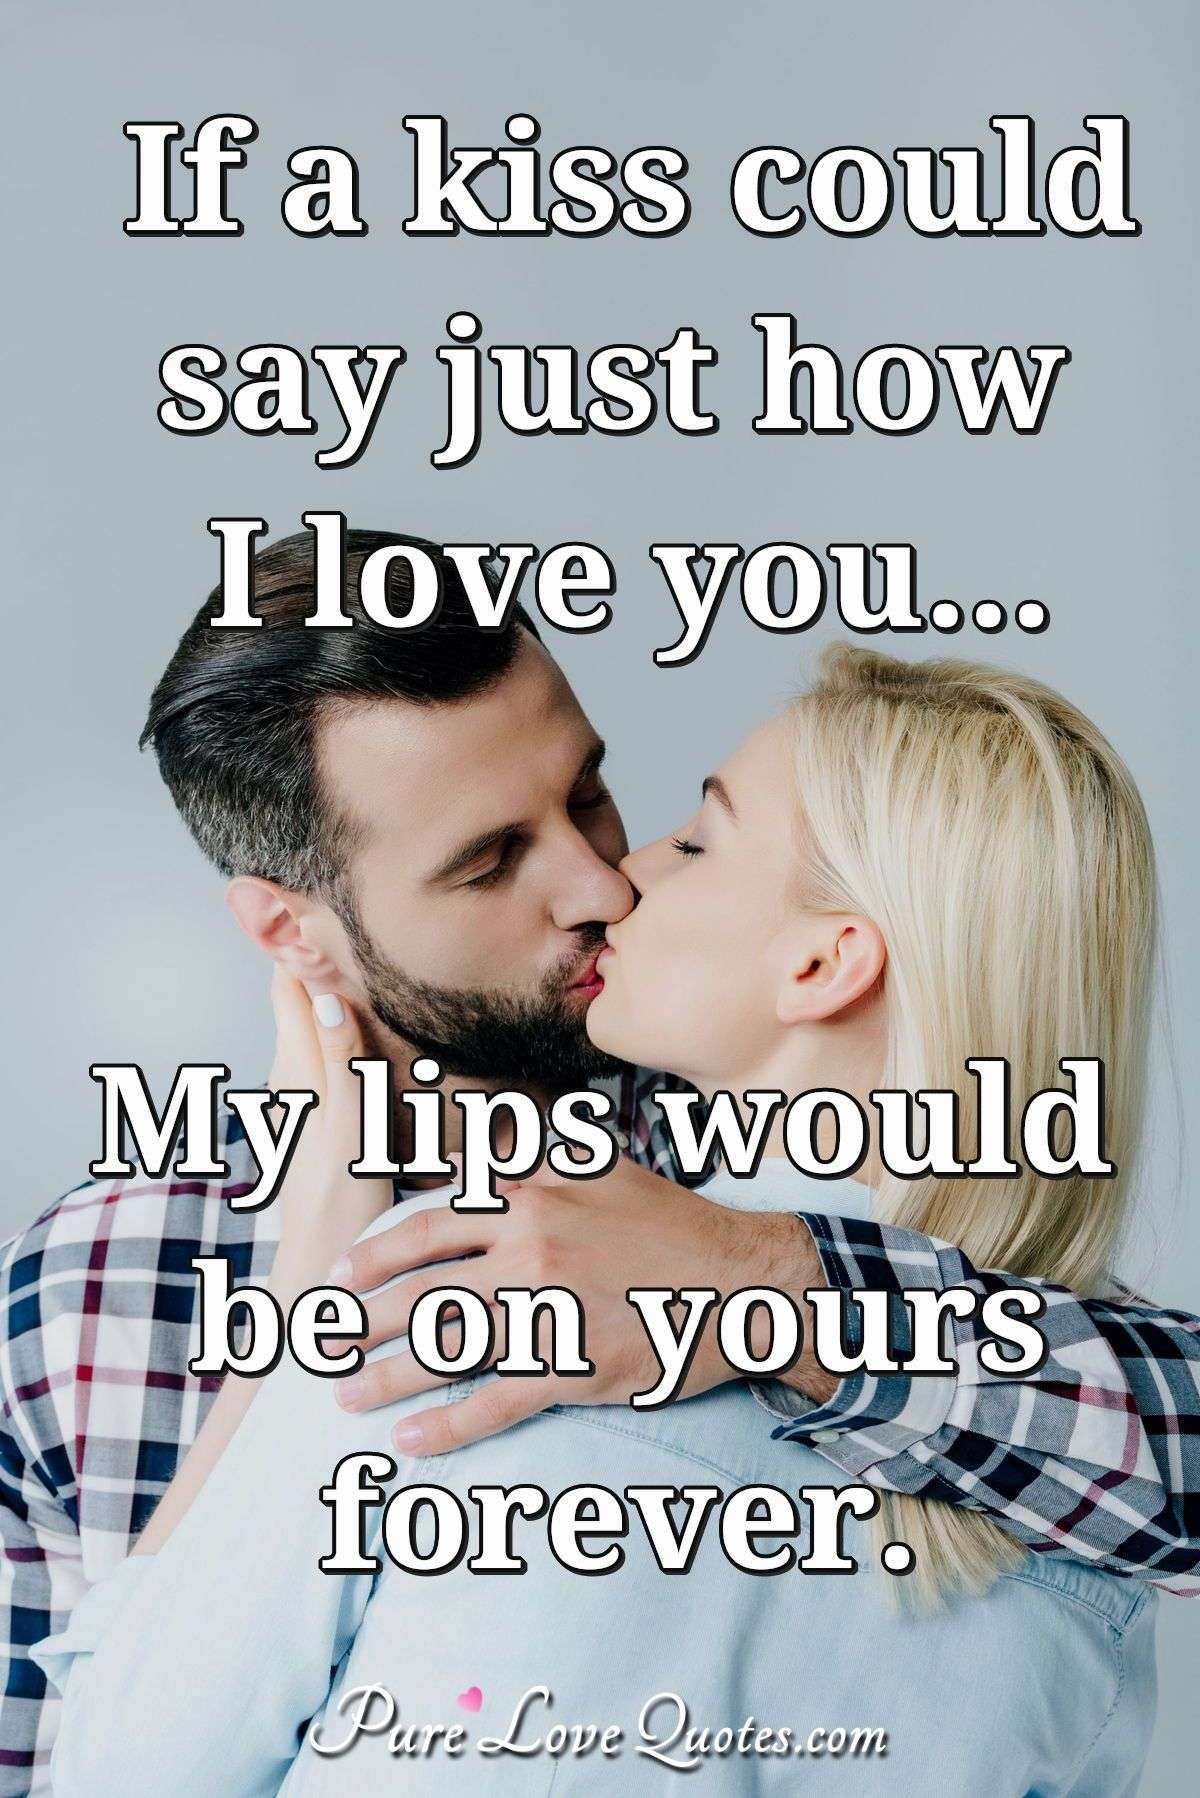 If a kiss could say just how I love you... My lips would be on yours forever. - Anonymous